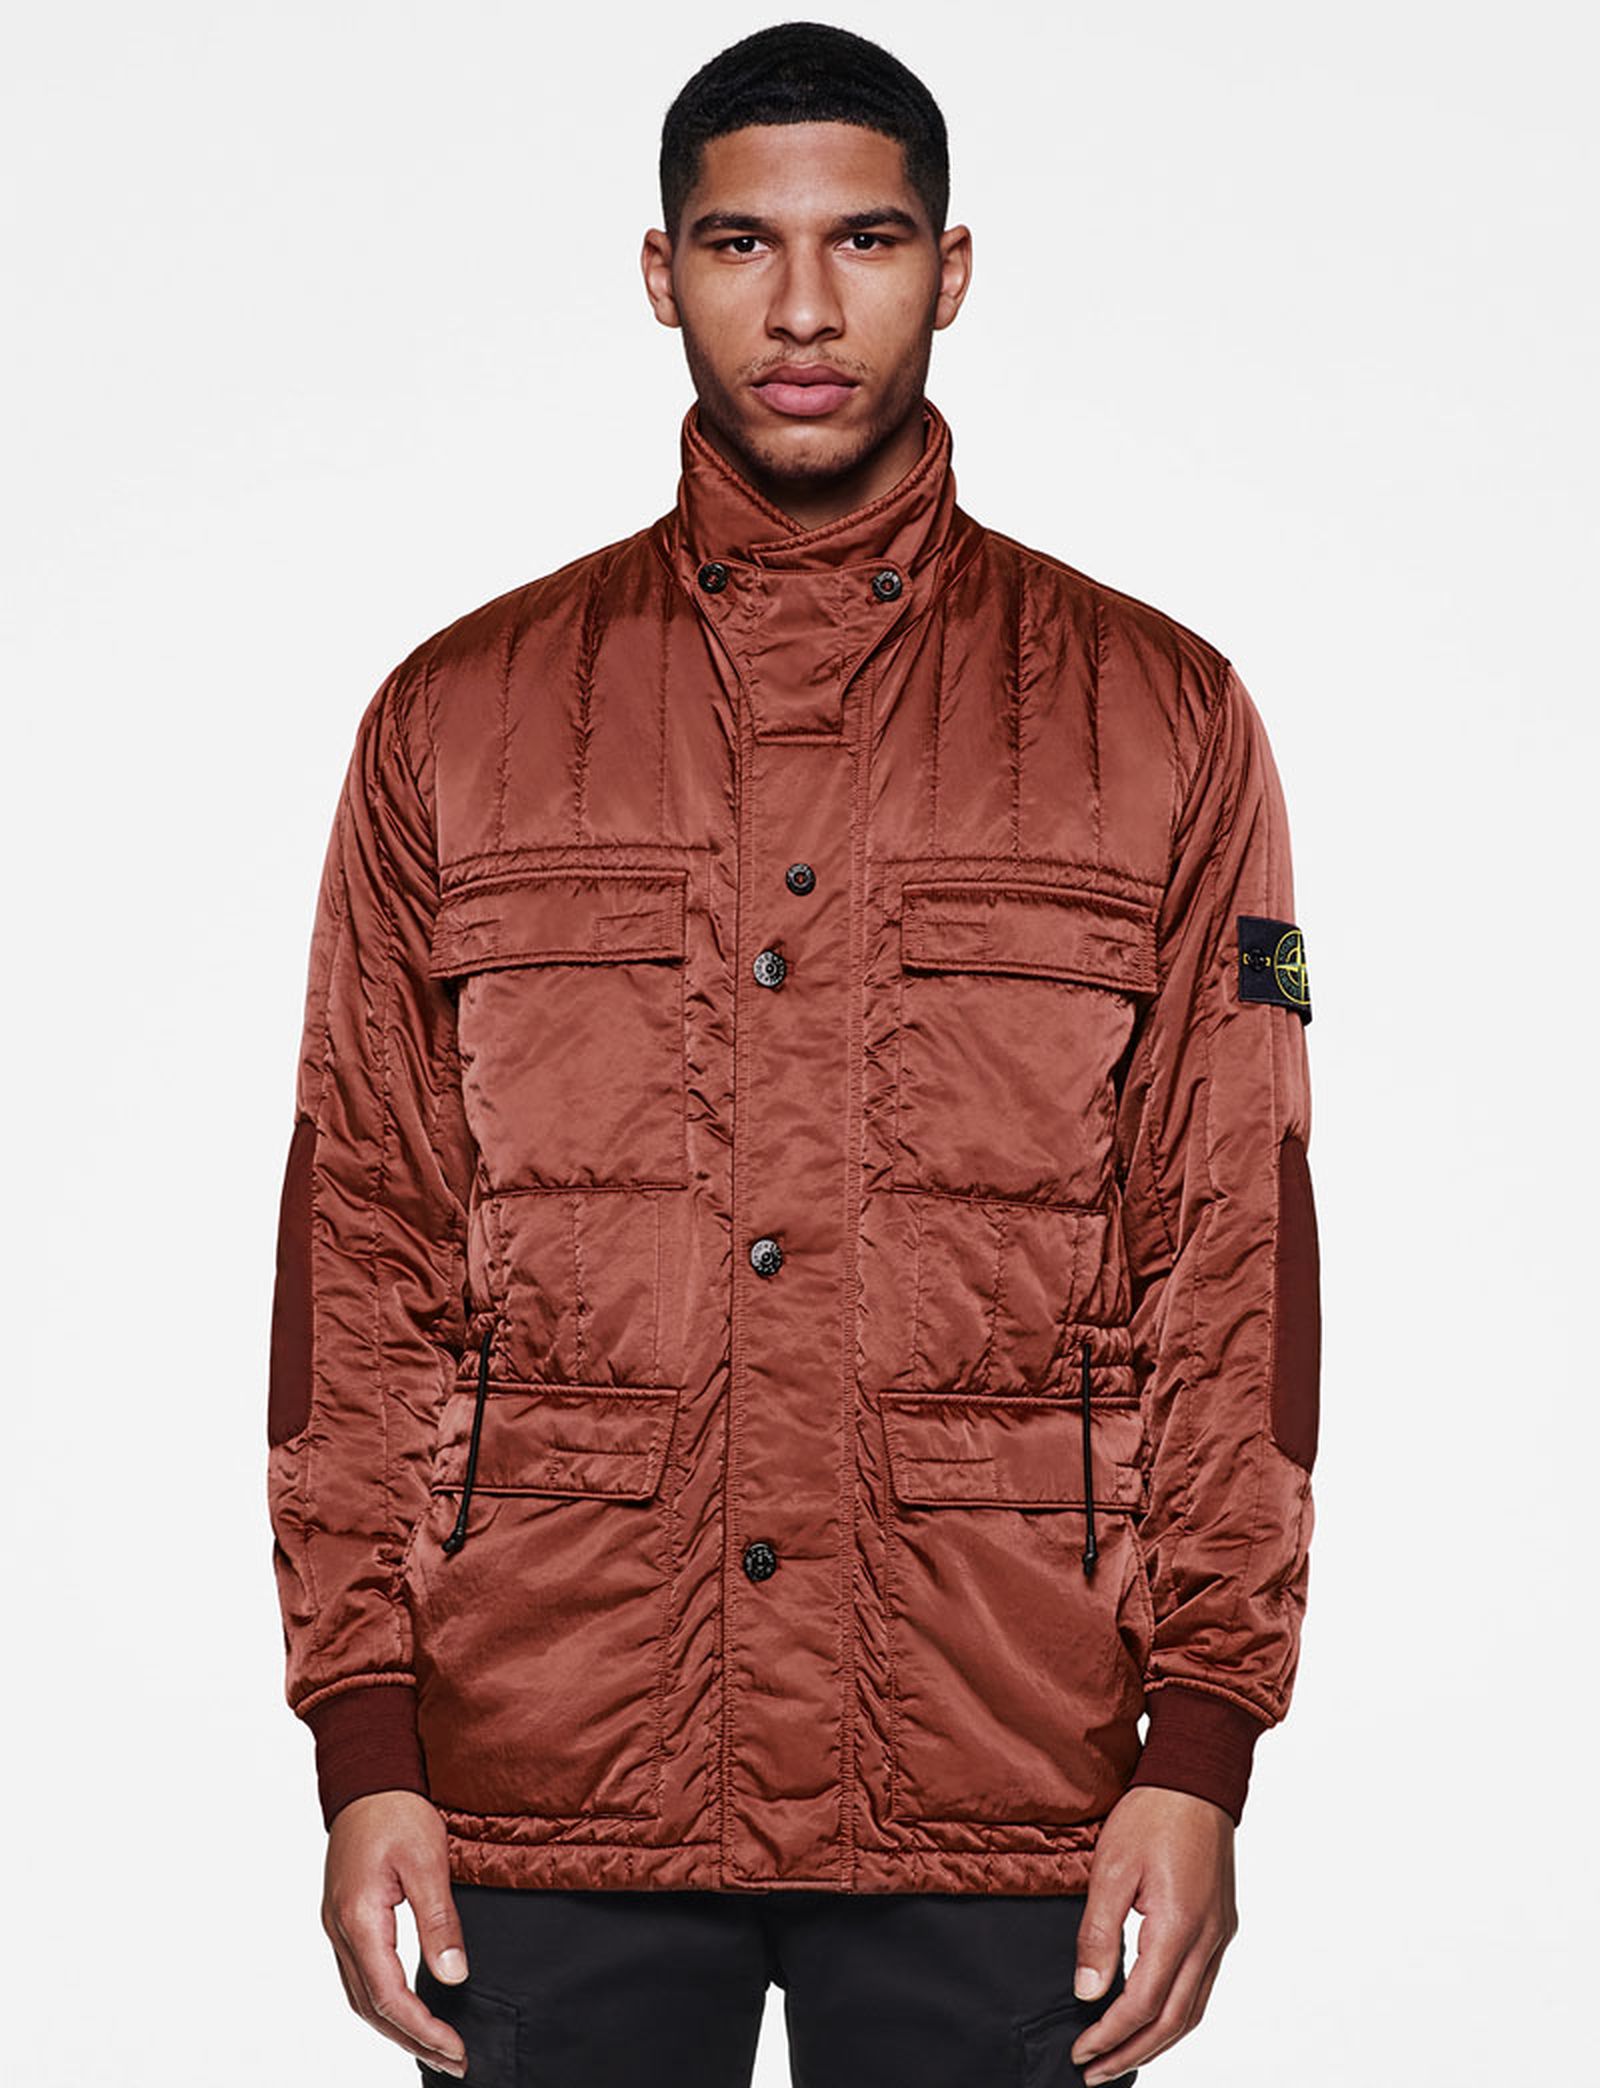 stone-island-fw21-icon-imagery-collection-07